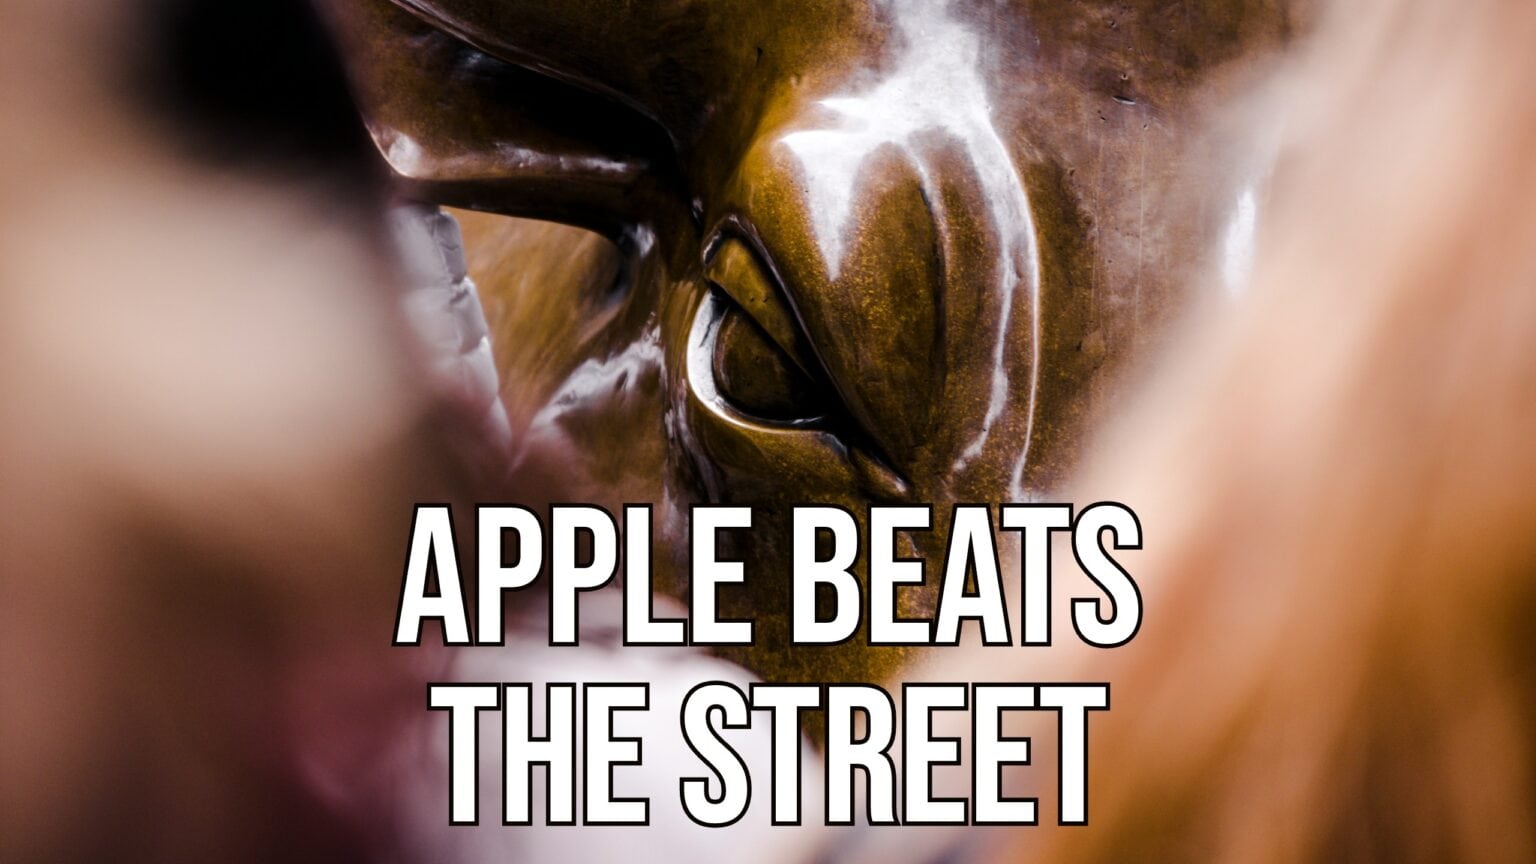 An image of the Wall Street bull with the words 